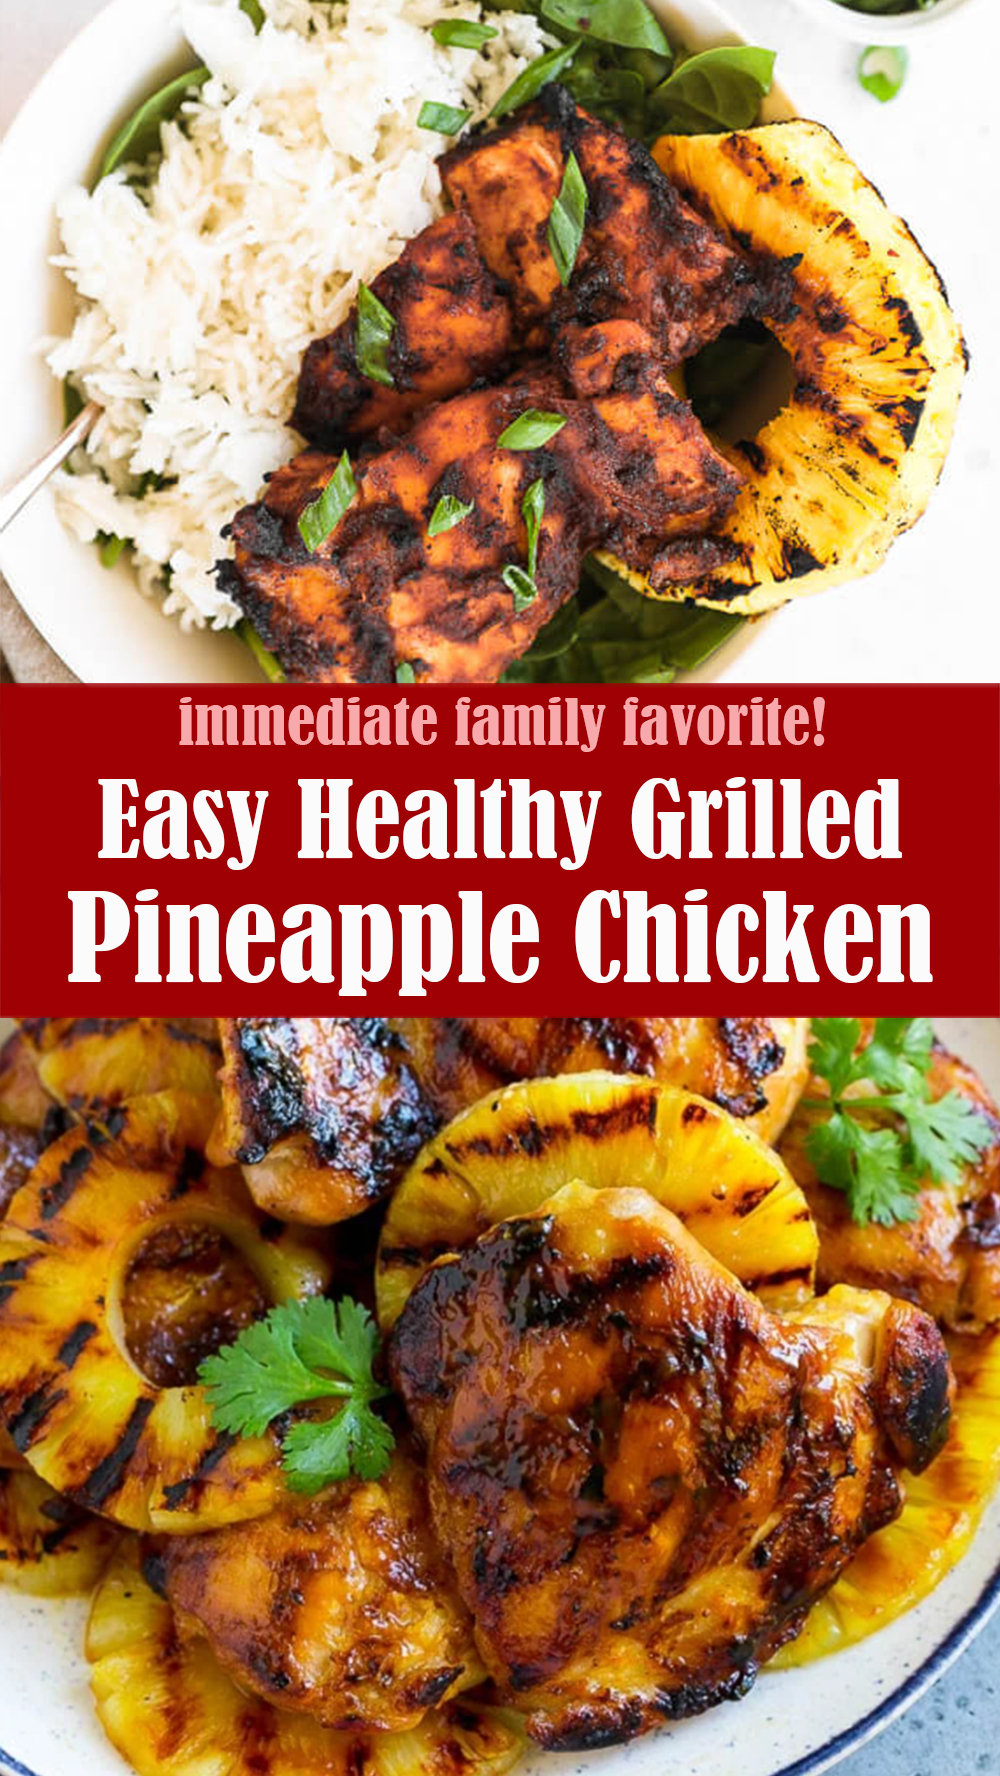 Easy Healthy Grilled Pineapple Chicken